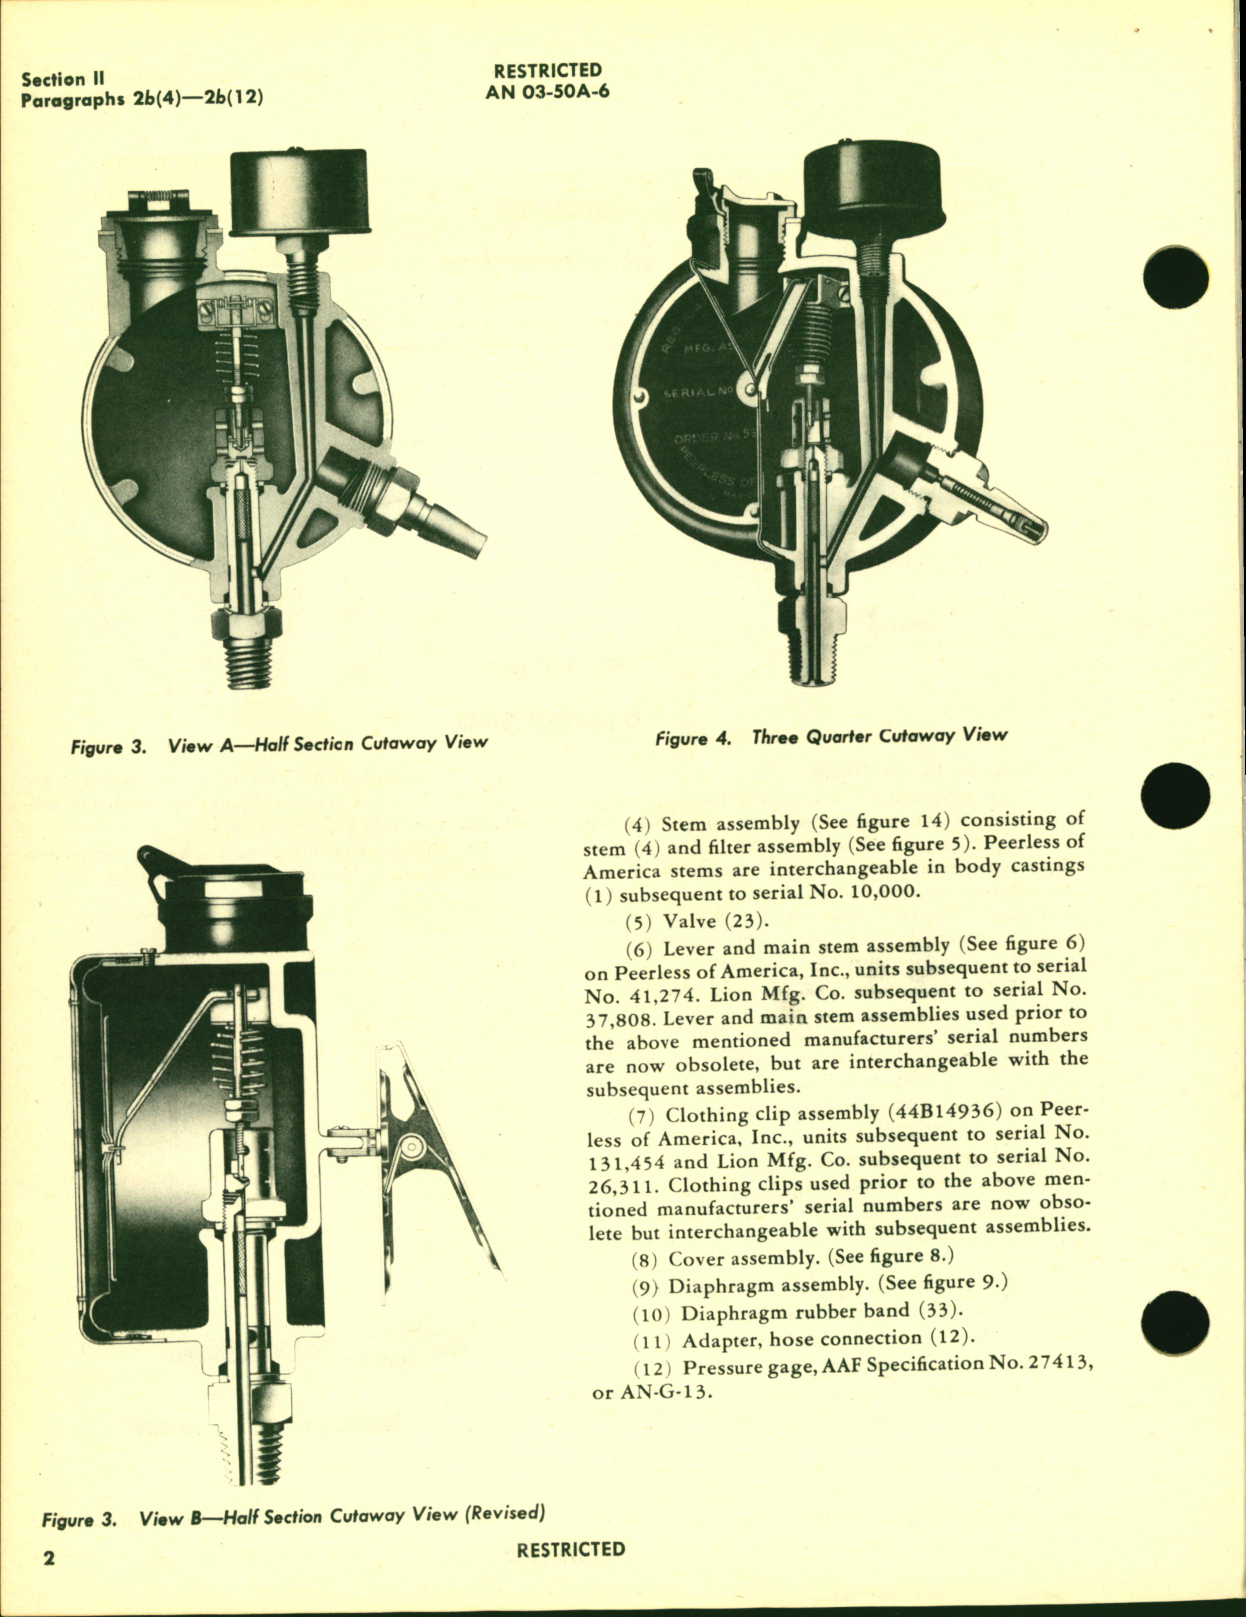 Sample page 7 from AirCorps Library document: Operation, Service and Overhaul Instructions with Parts Catalog for Portable Oxygen Demand Regulator Type A-13